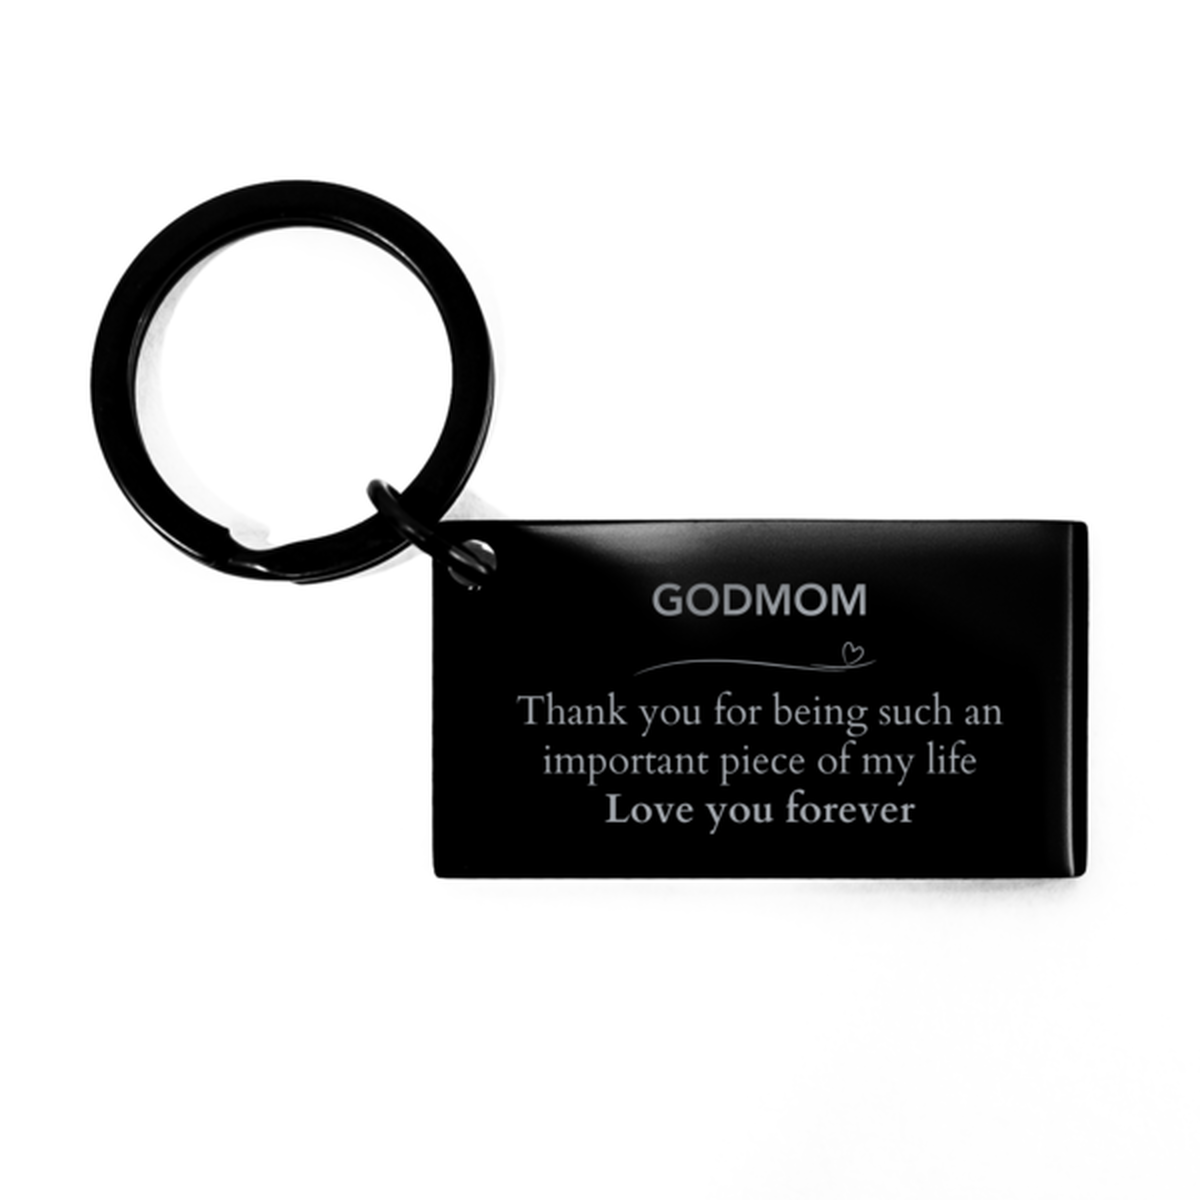 Appropriate Godmom Keychain Epic Birthday Gifts for Godmom Thank you for being such an important piece of my life Godmom Christmas Mothers Fathers Day